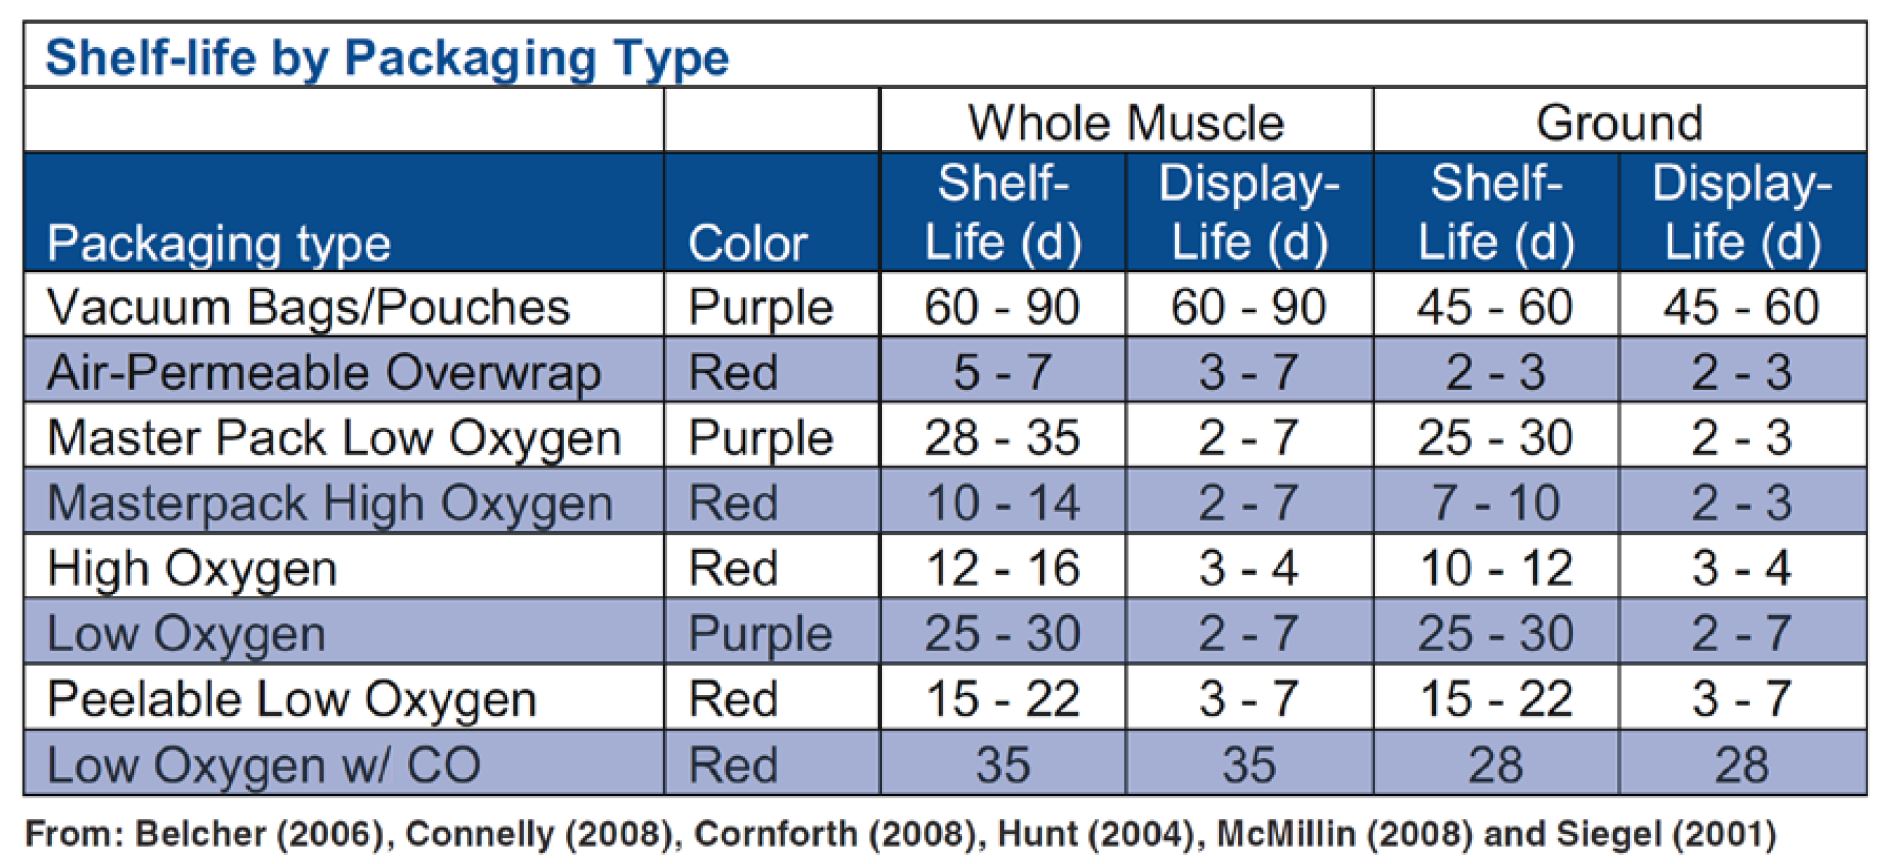 http://www.beefresearch.org/Media/BeefResearch/Images/shelf-life-table-1_10-26-2020-72.jpg